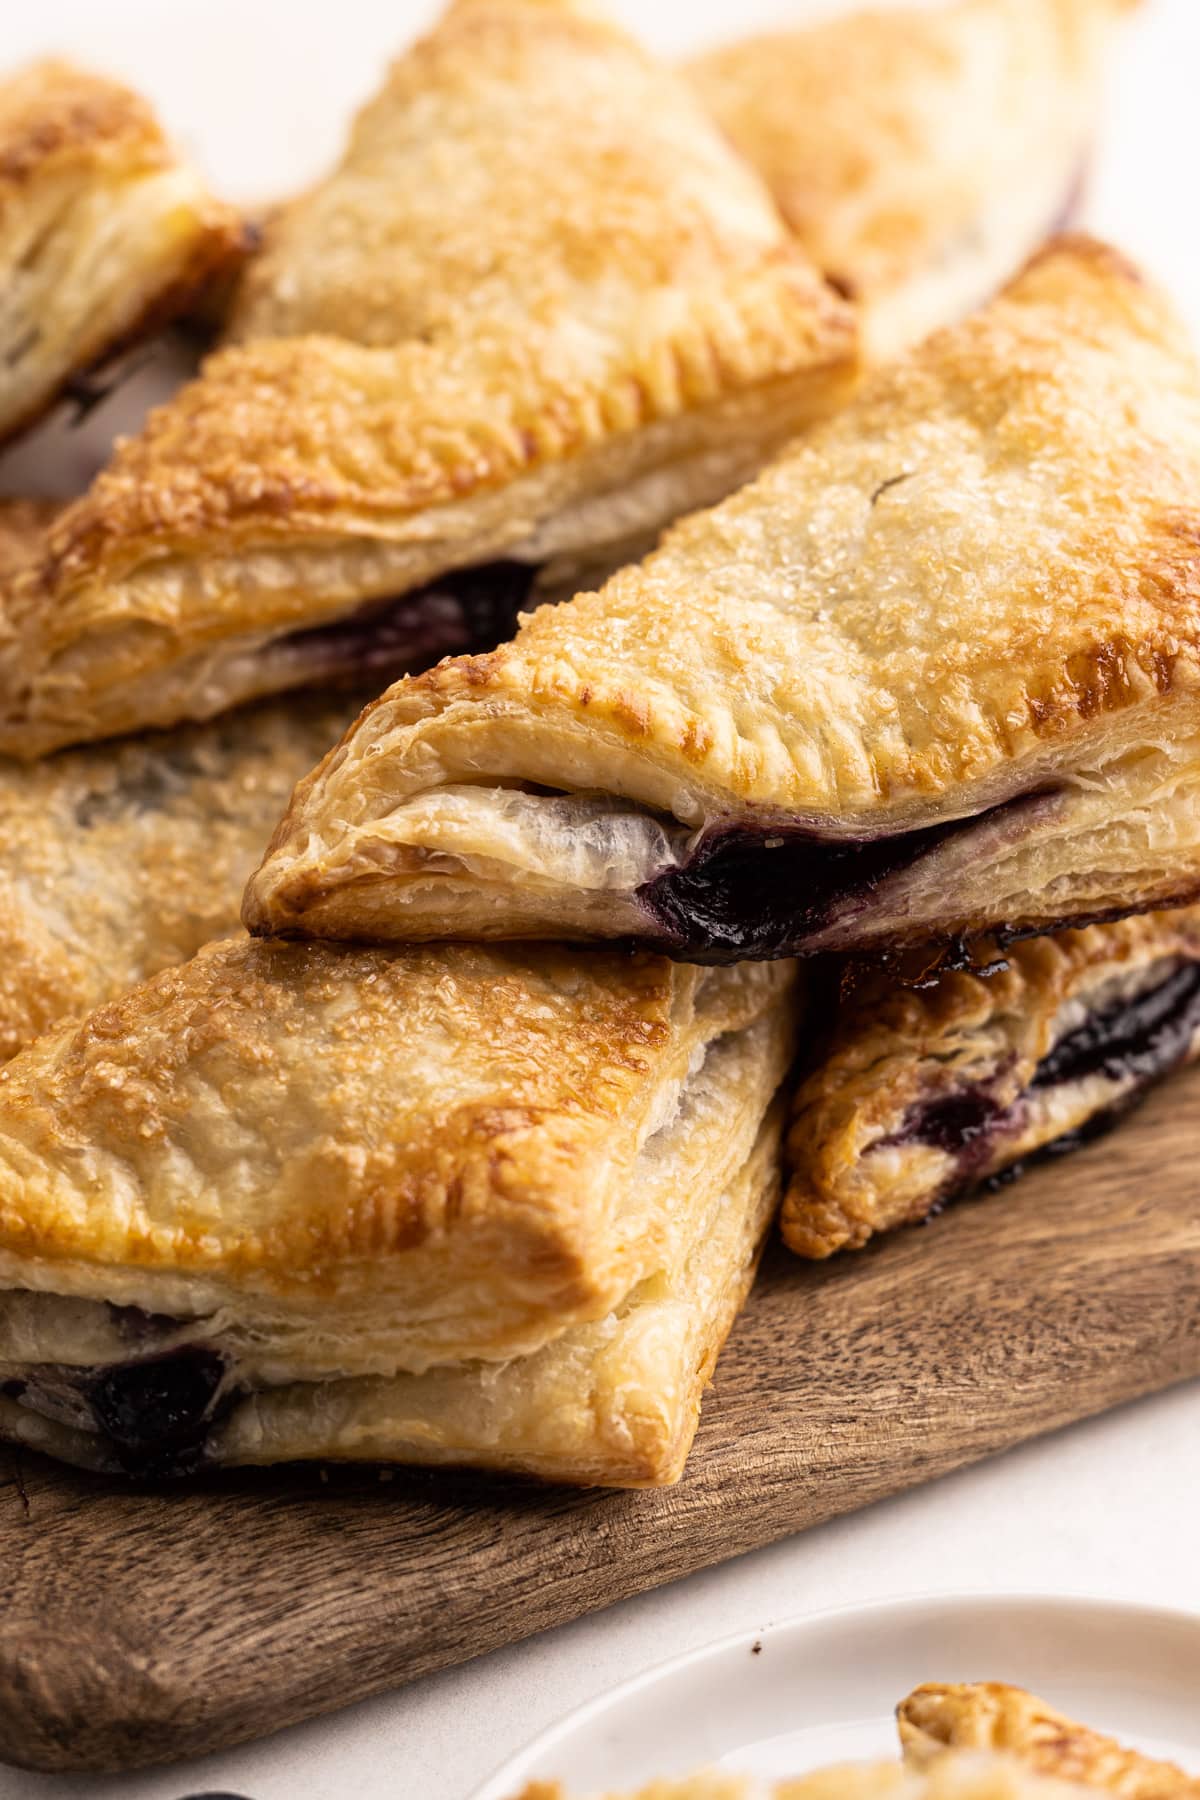 Baked Blueberry Turnovers